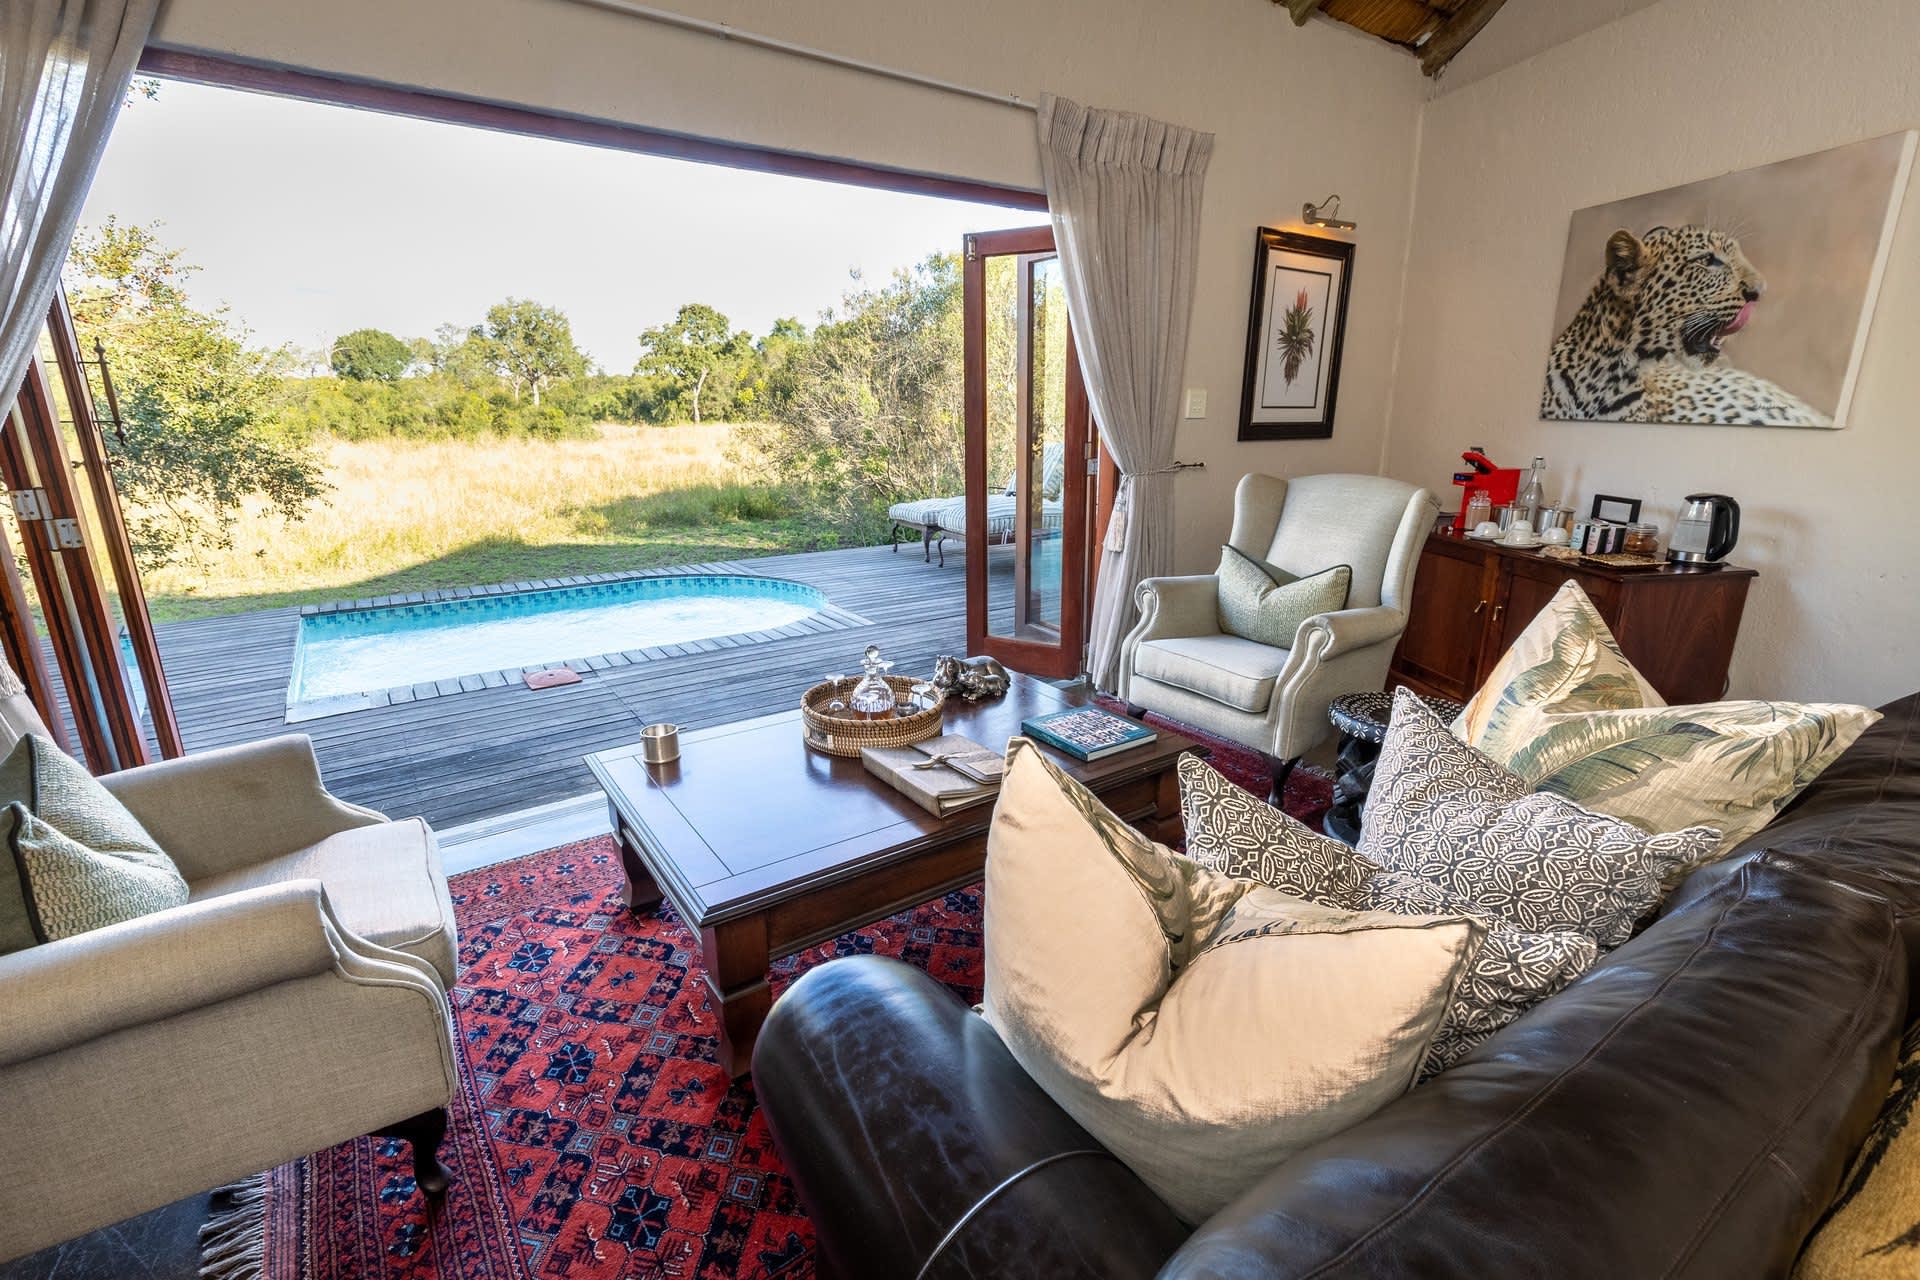 5* TINTSWALO SAFARI LODGE -Manyeleti Nature Reserve, Greater Kruger- 1 Night LUXURY Stay for 2 in a Suite + All Meals + Safari Activities + House Drinks!